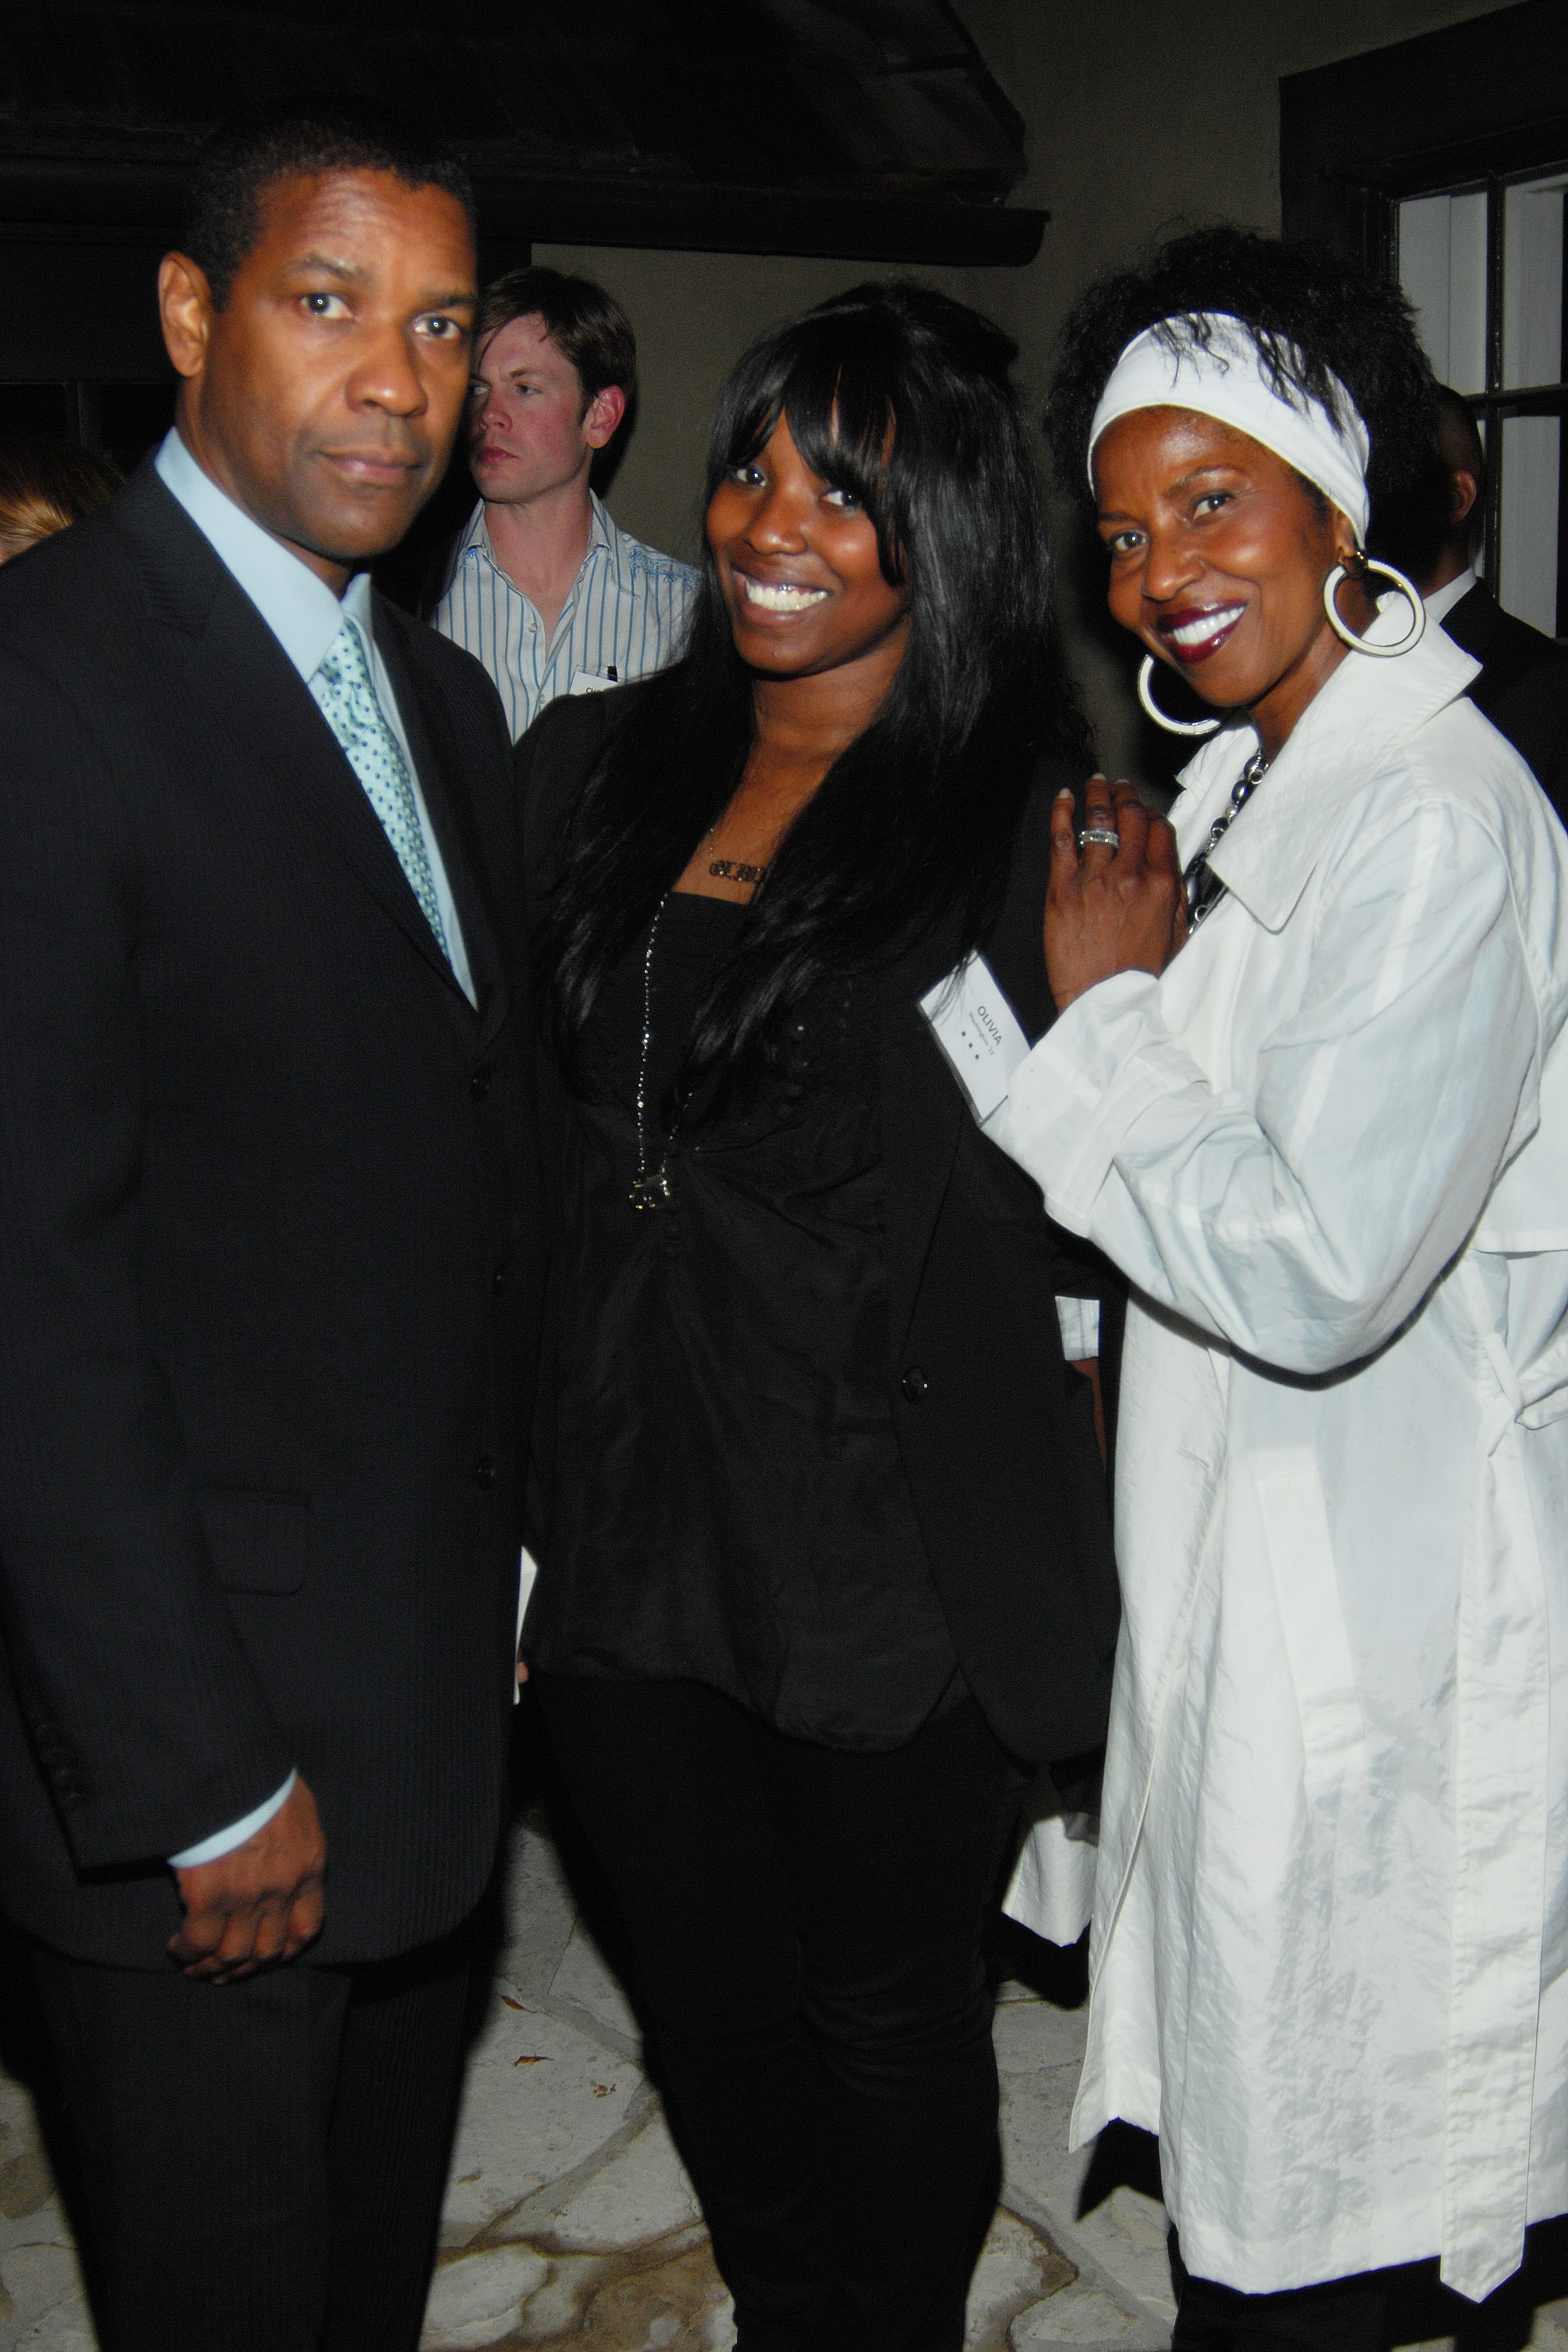 Denzel Olivia, and Pauletta Washington at the Tisch School Summer Soiree in Beverly Hills, California on June 3, 2009 | Source: Getty Images